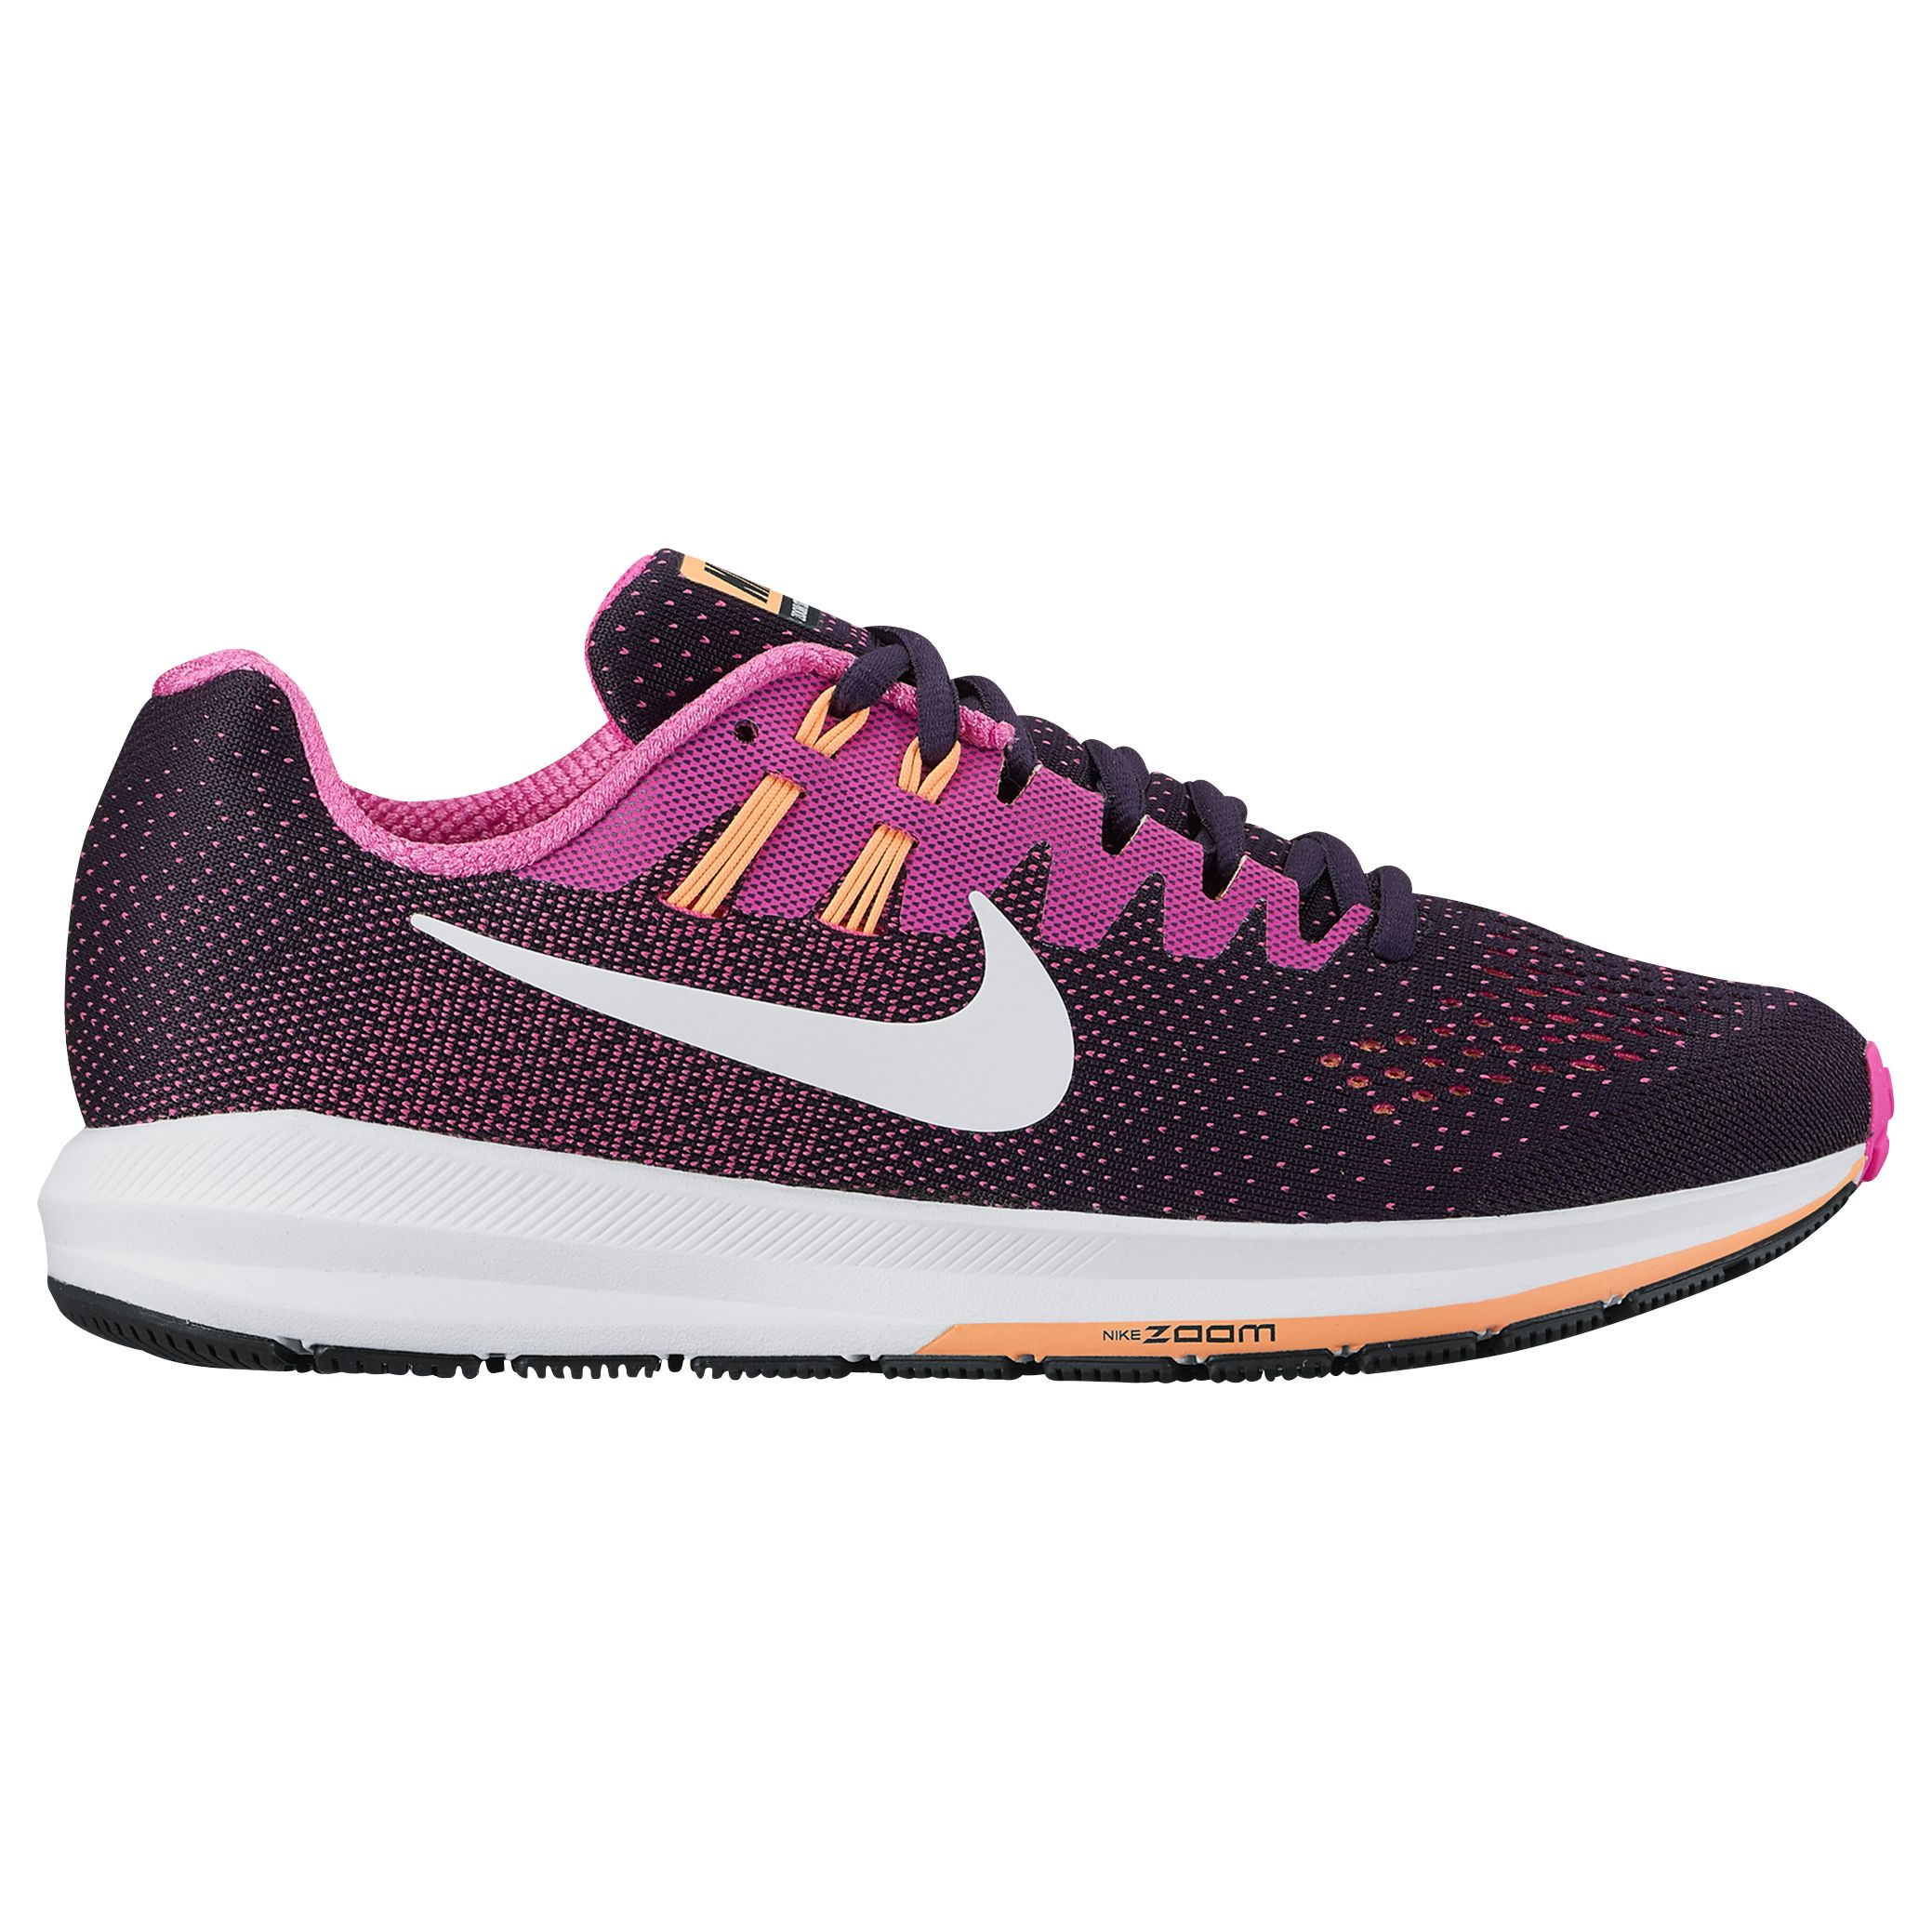 Nike Air Zoom Structure 20 Women's Running Shoes, Purple Dynastly/White ...